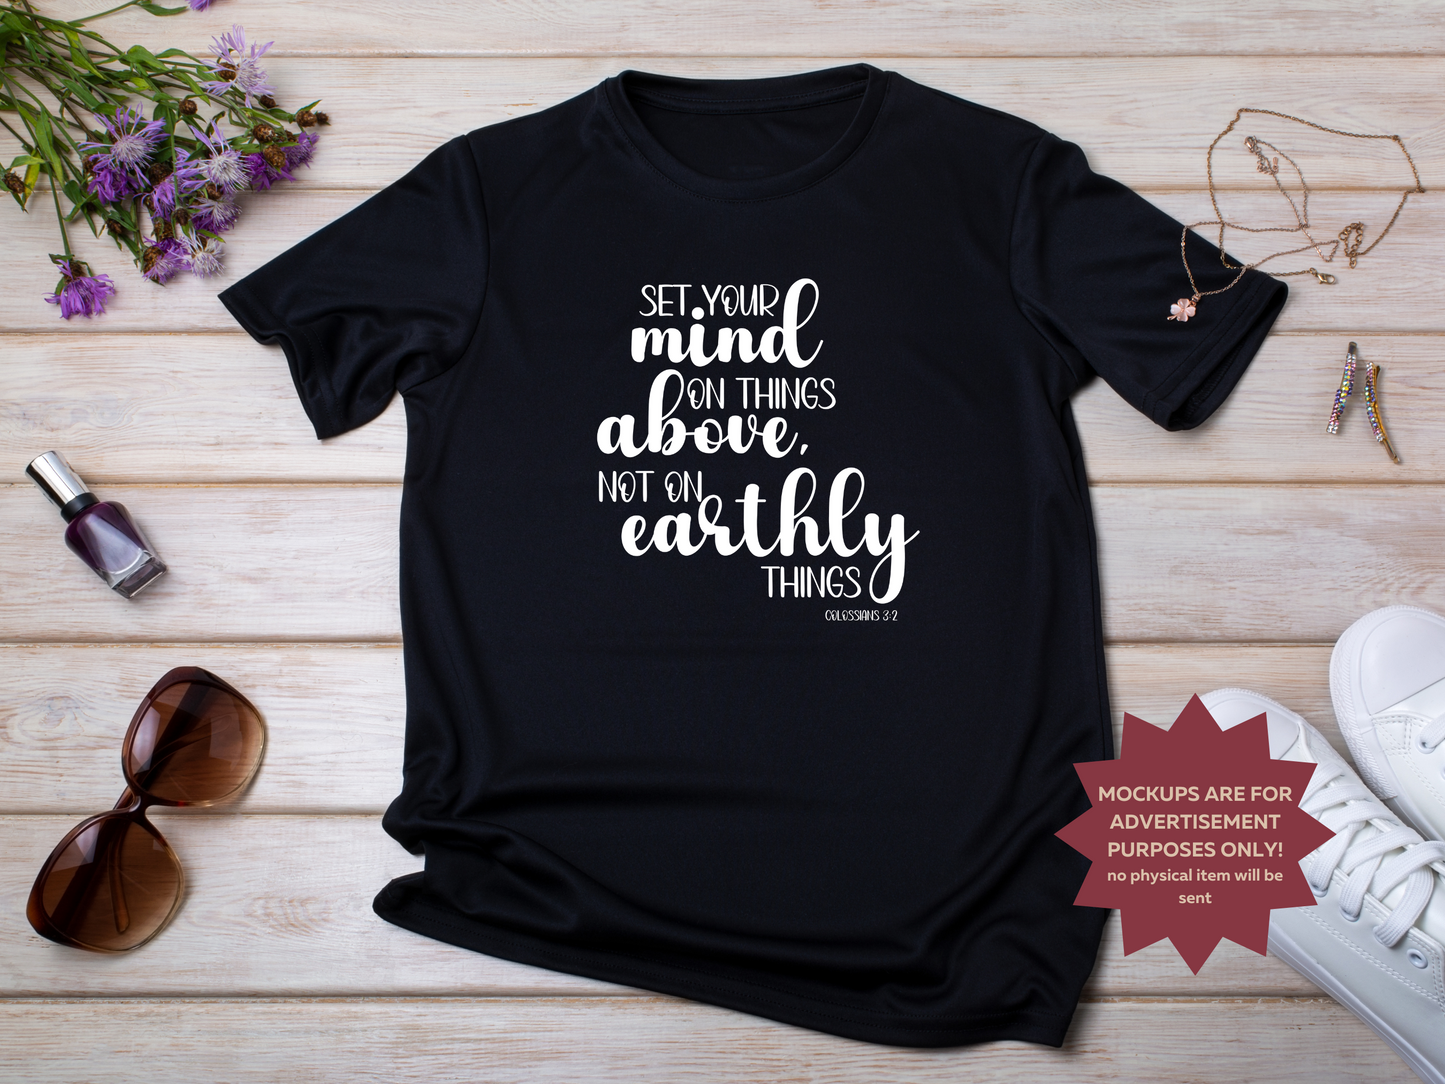 Set Your Mind on Things Above, Not on Earthly Things PNG & SVG